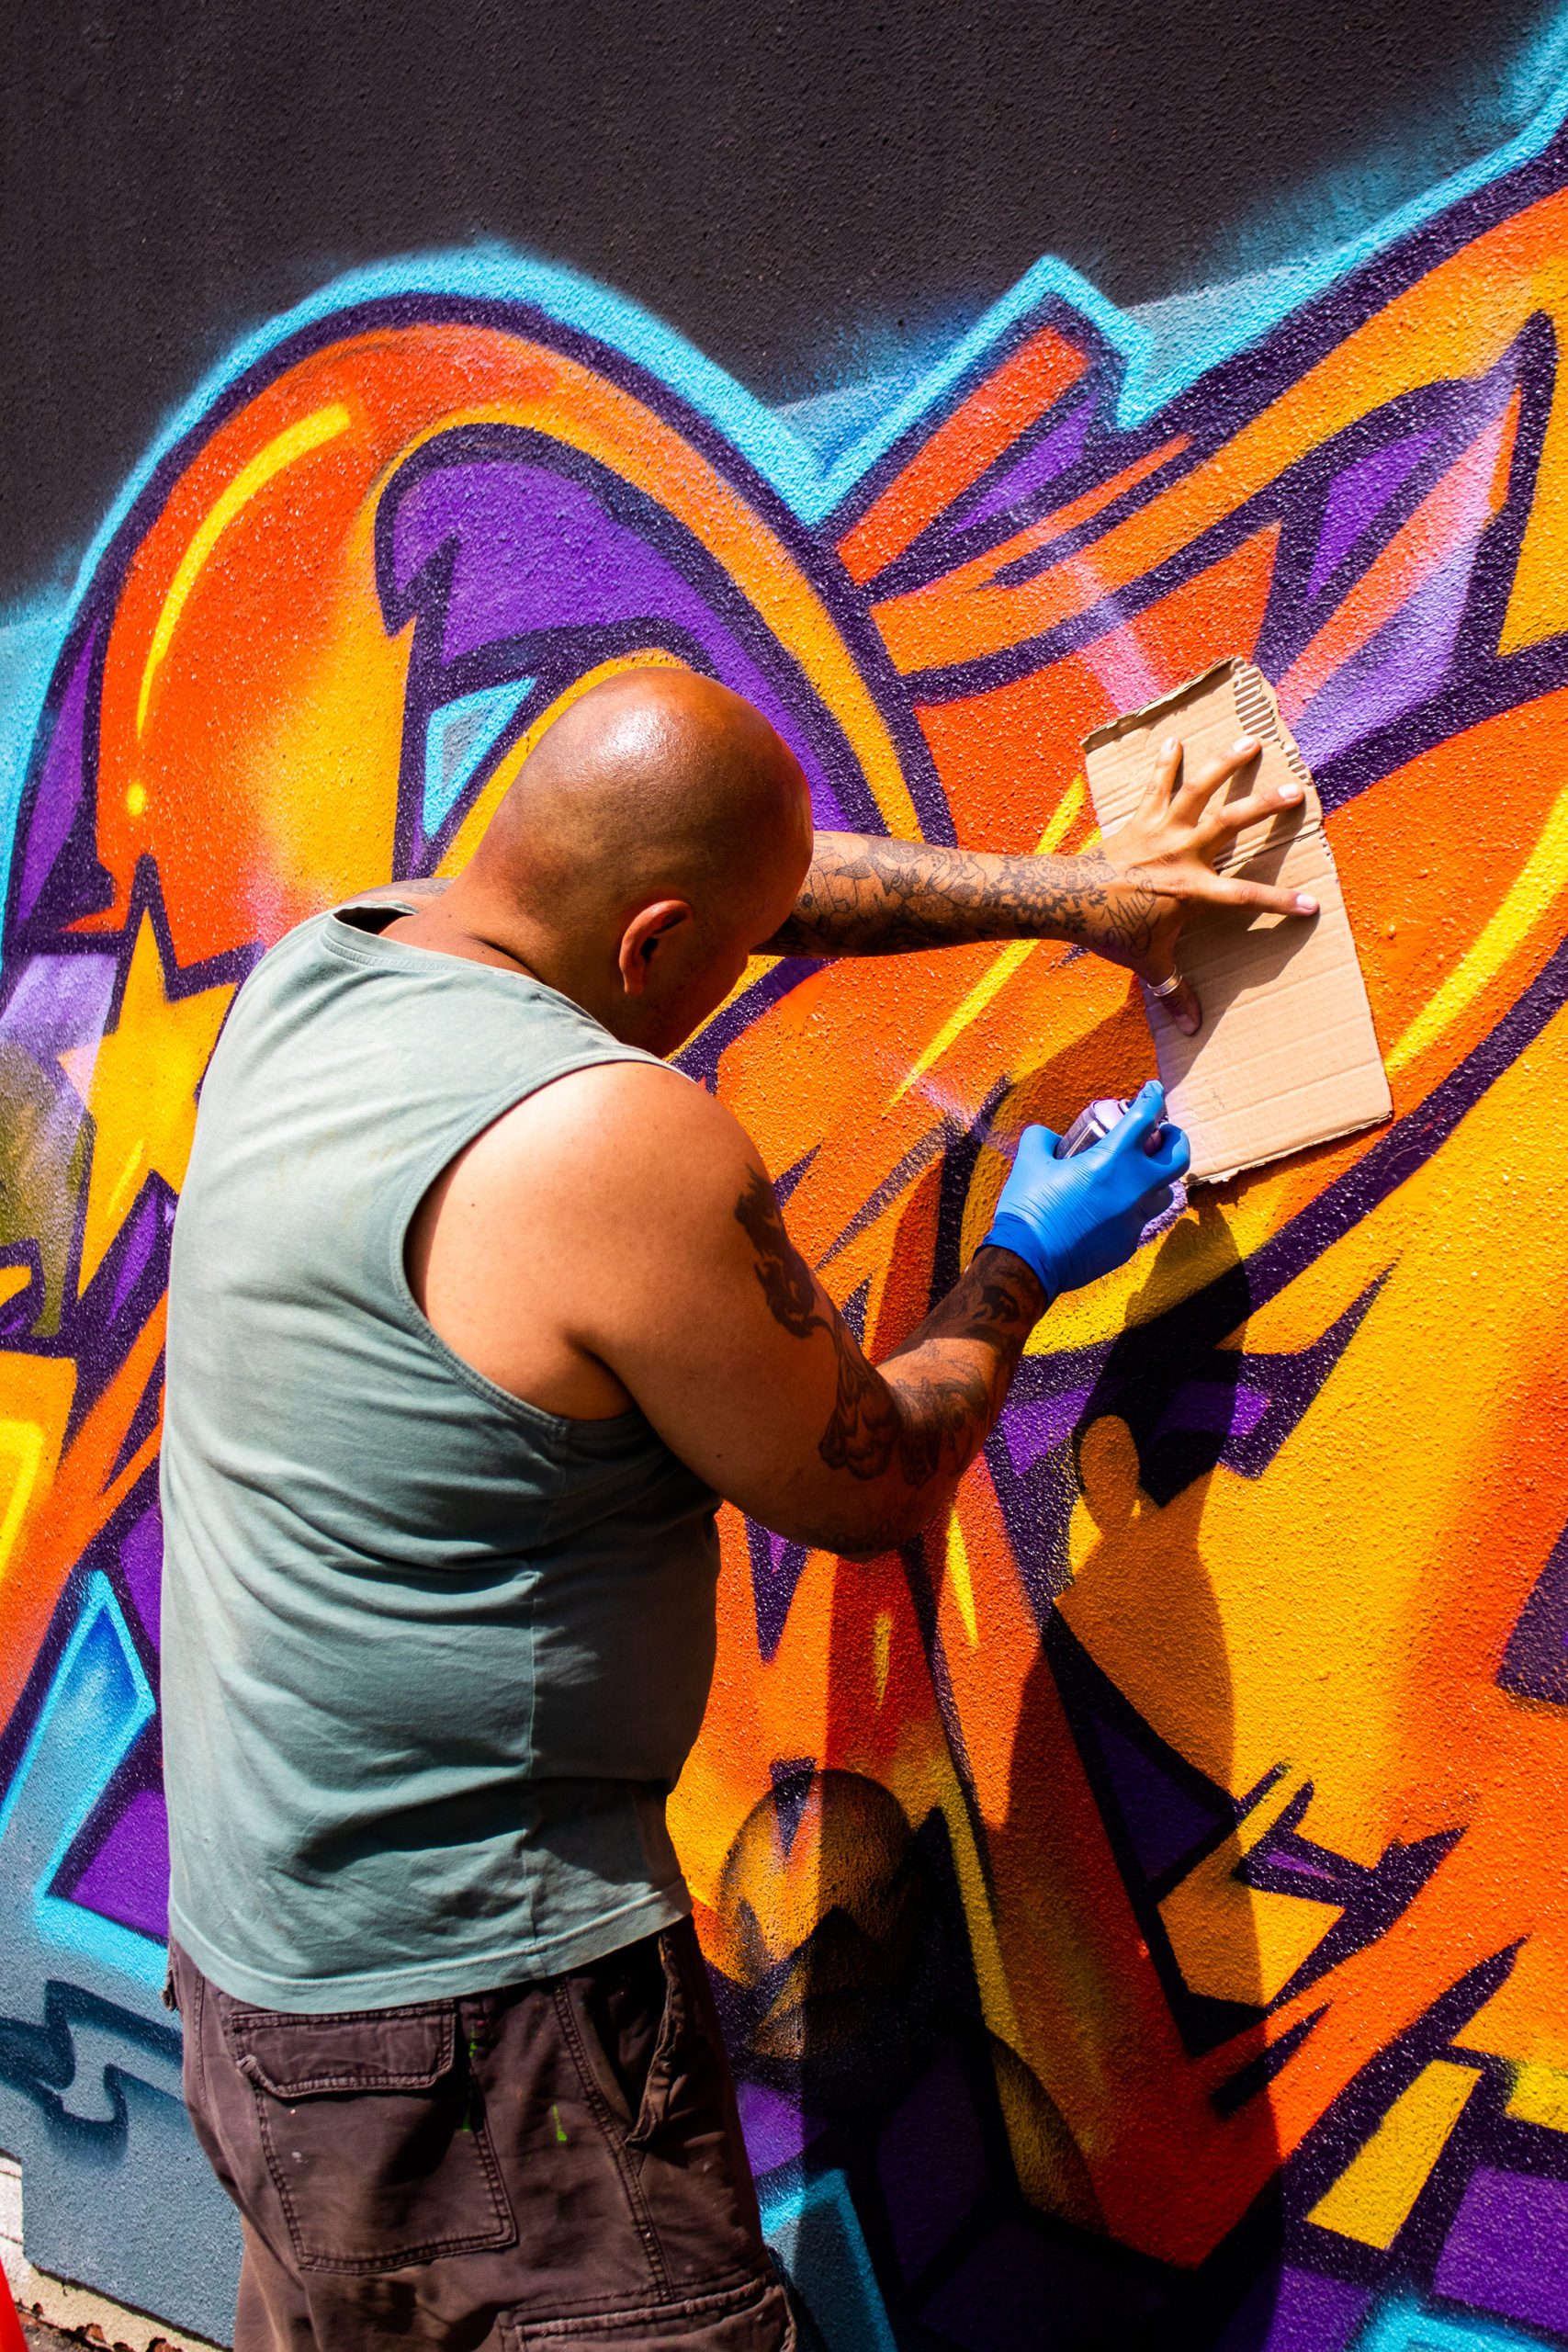 Photograph of artist Angel Cruz painting his mural on a wall. There are bright colours of orange, red, purple and blue present.